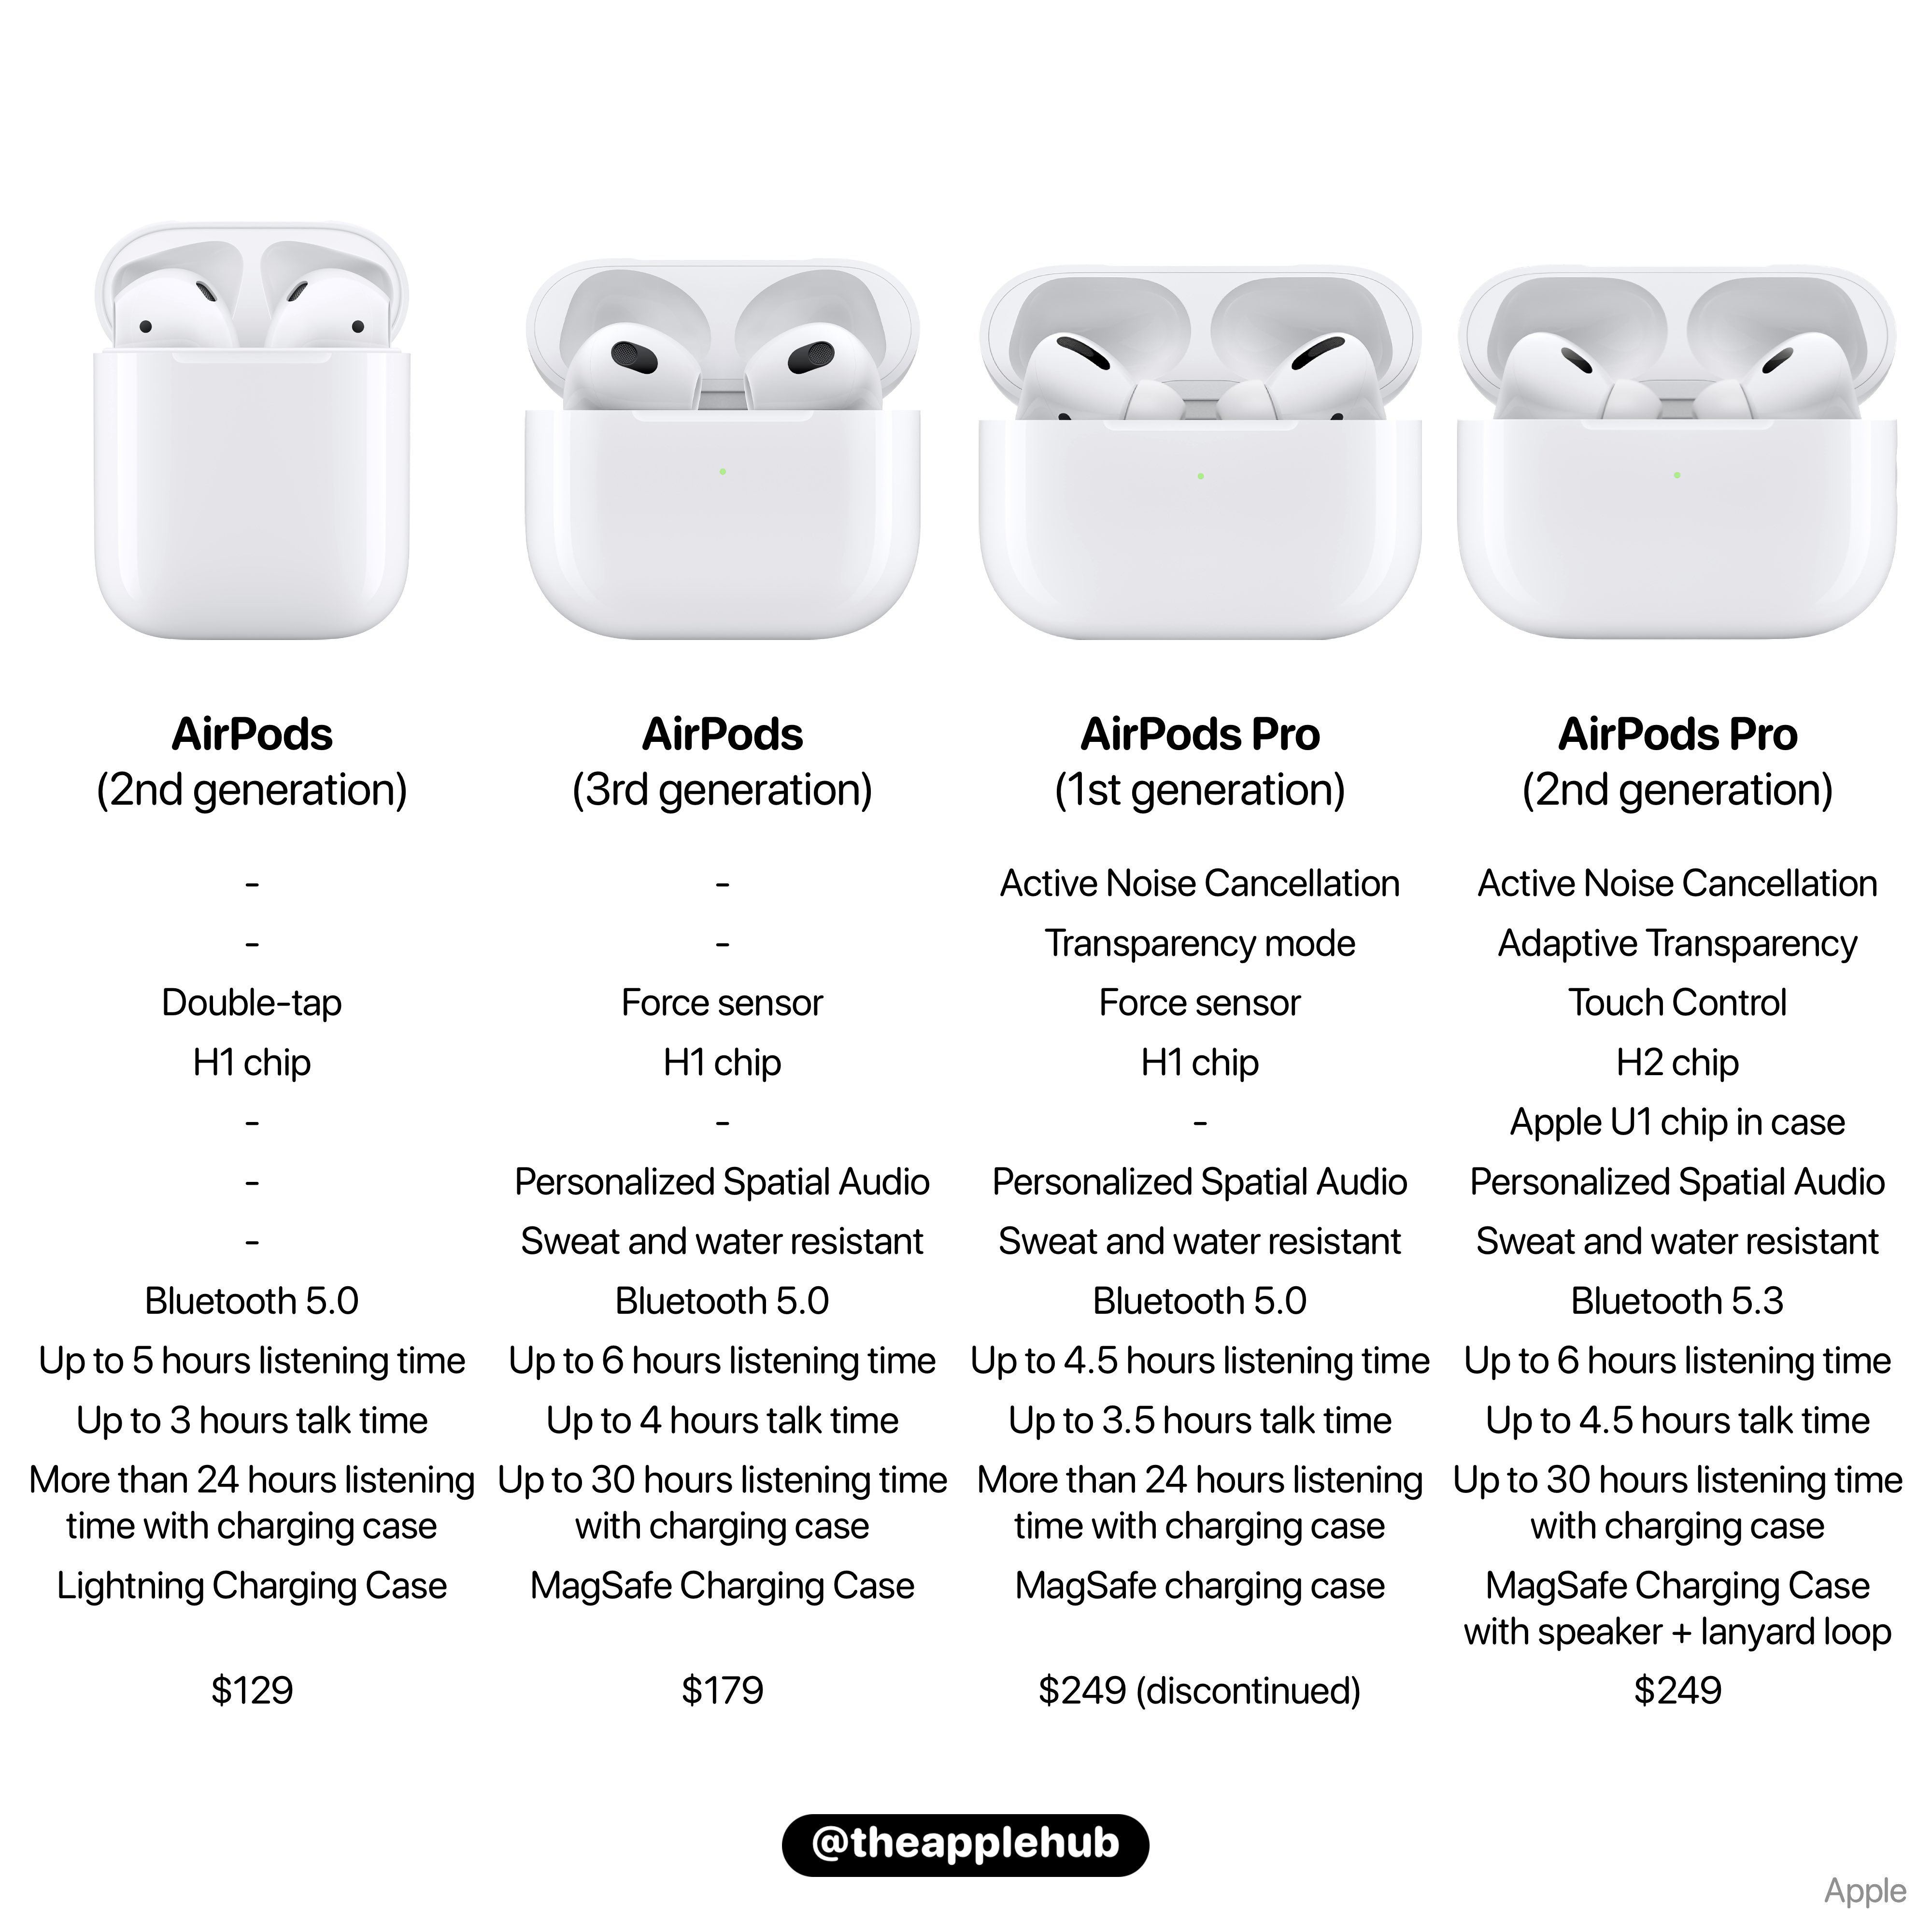 Definition disharmoni Wrap Apple Hub on Twitter: "AirPods and AirPods Pro comparison! Would you buy  the new AirPods Pro? https://t.co/T4w0V9toqK" / Twitter